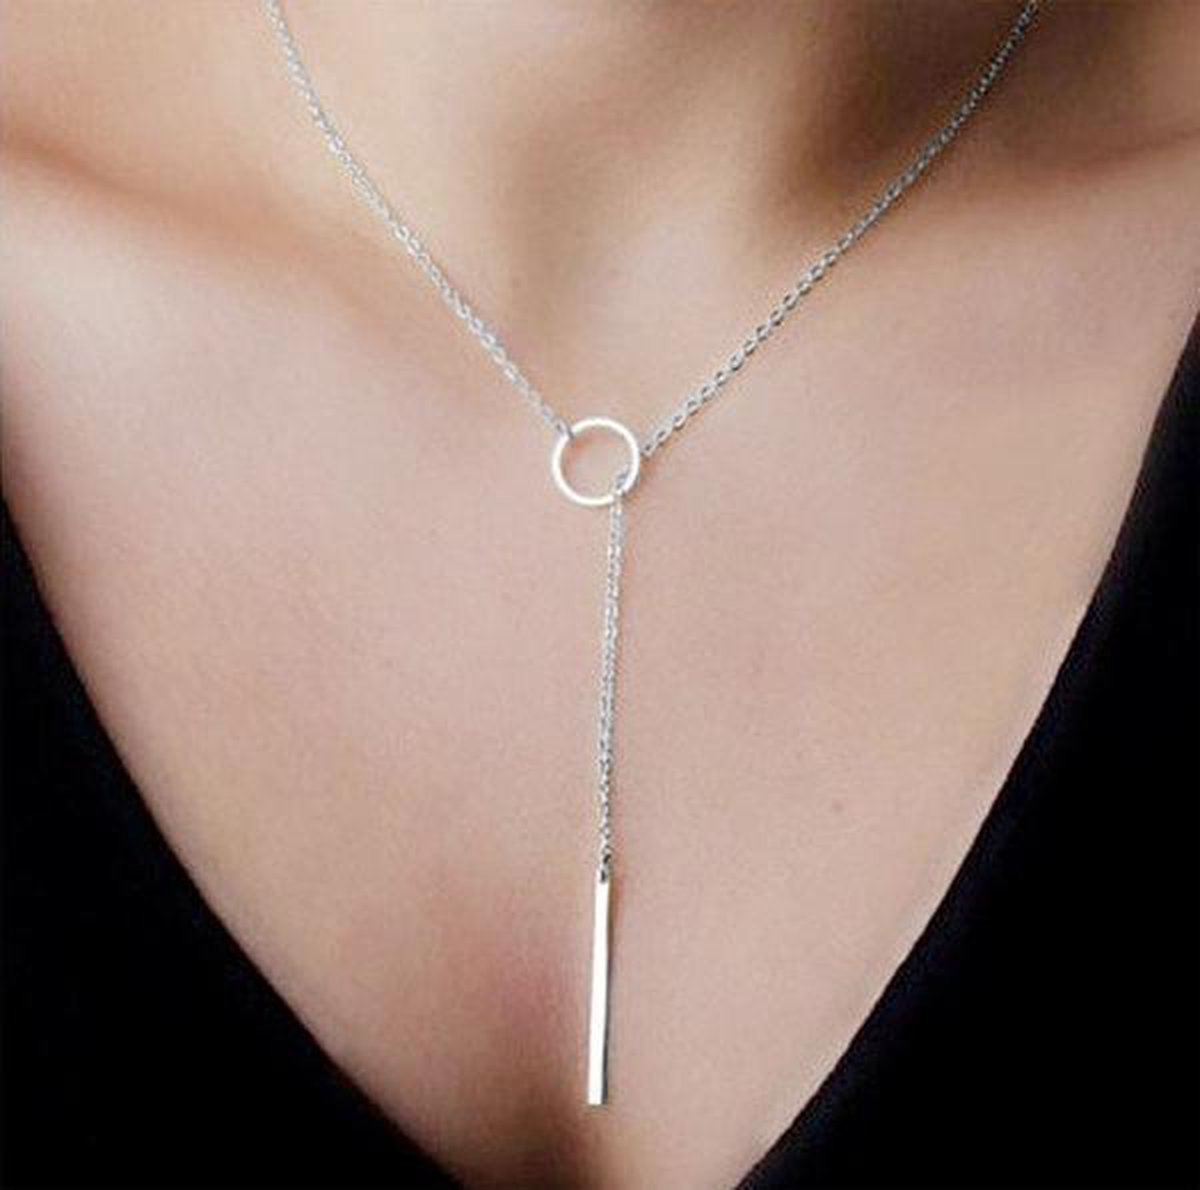 24/7 Jewelry Collection Y Ketting Lasso - 60cm - Zilver | bol.com